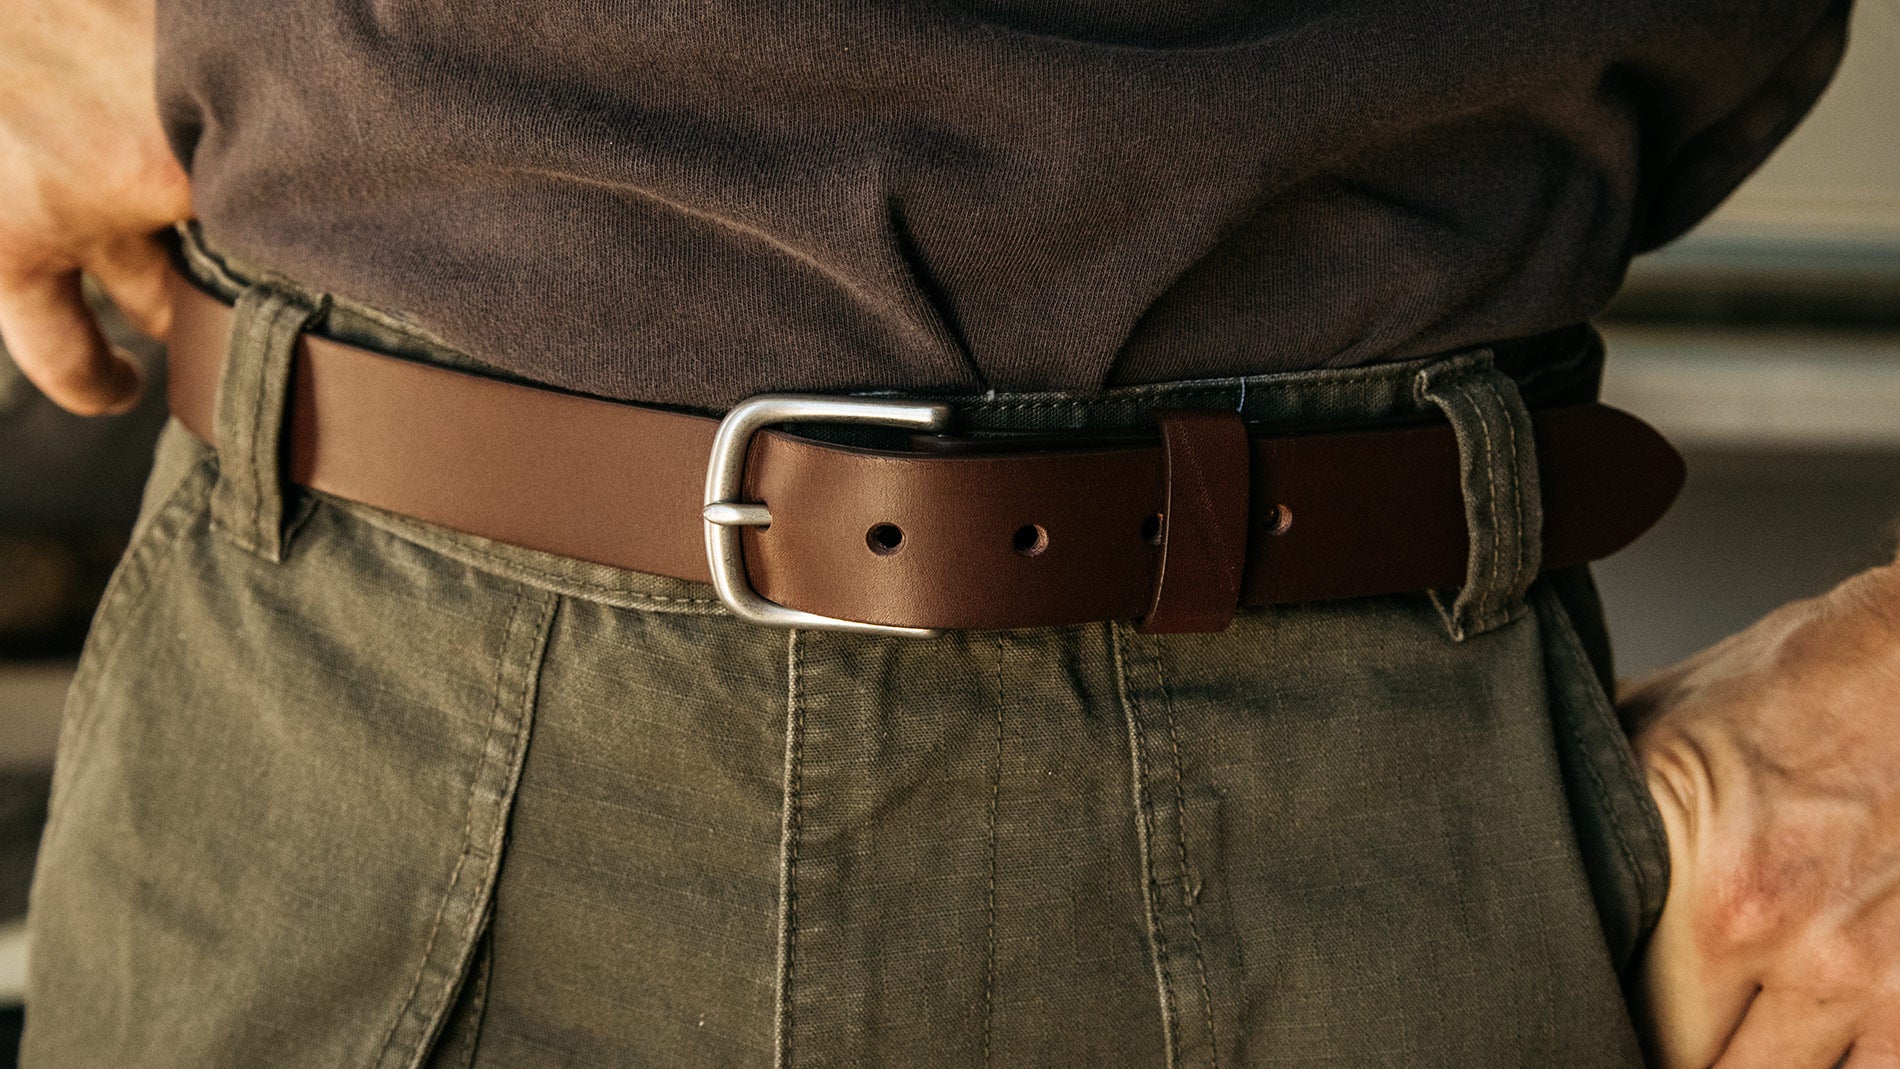 Classic Leather Belt in Cognac, Made in the USA